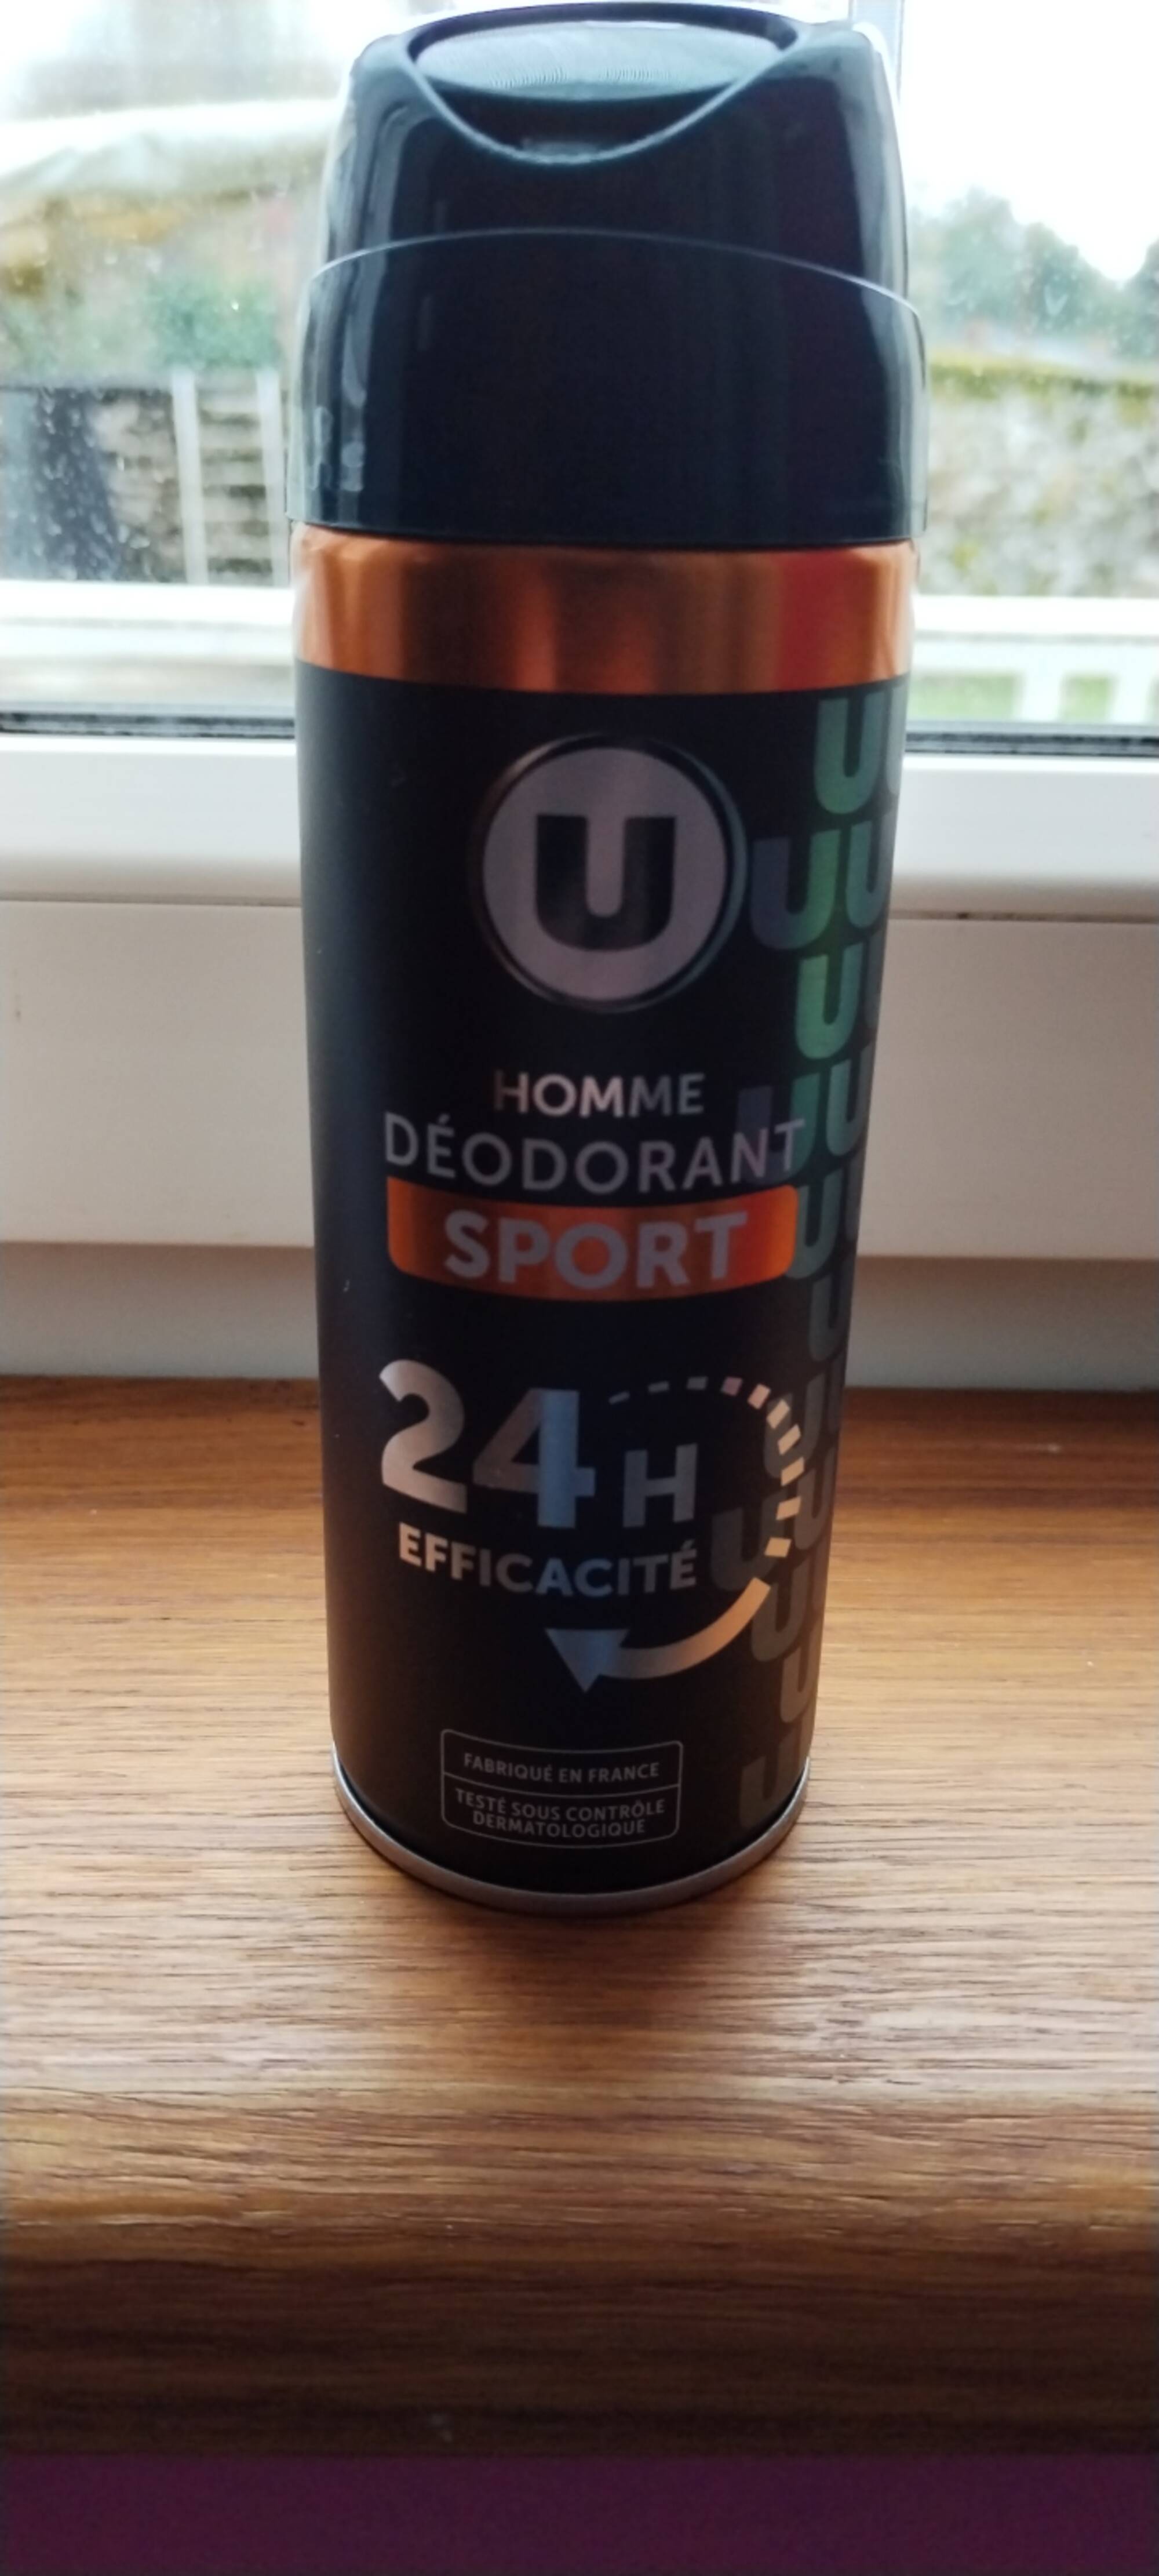 BY U - Déodorant sport homme 24h